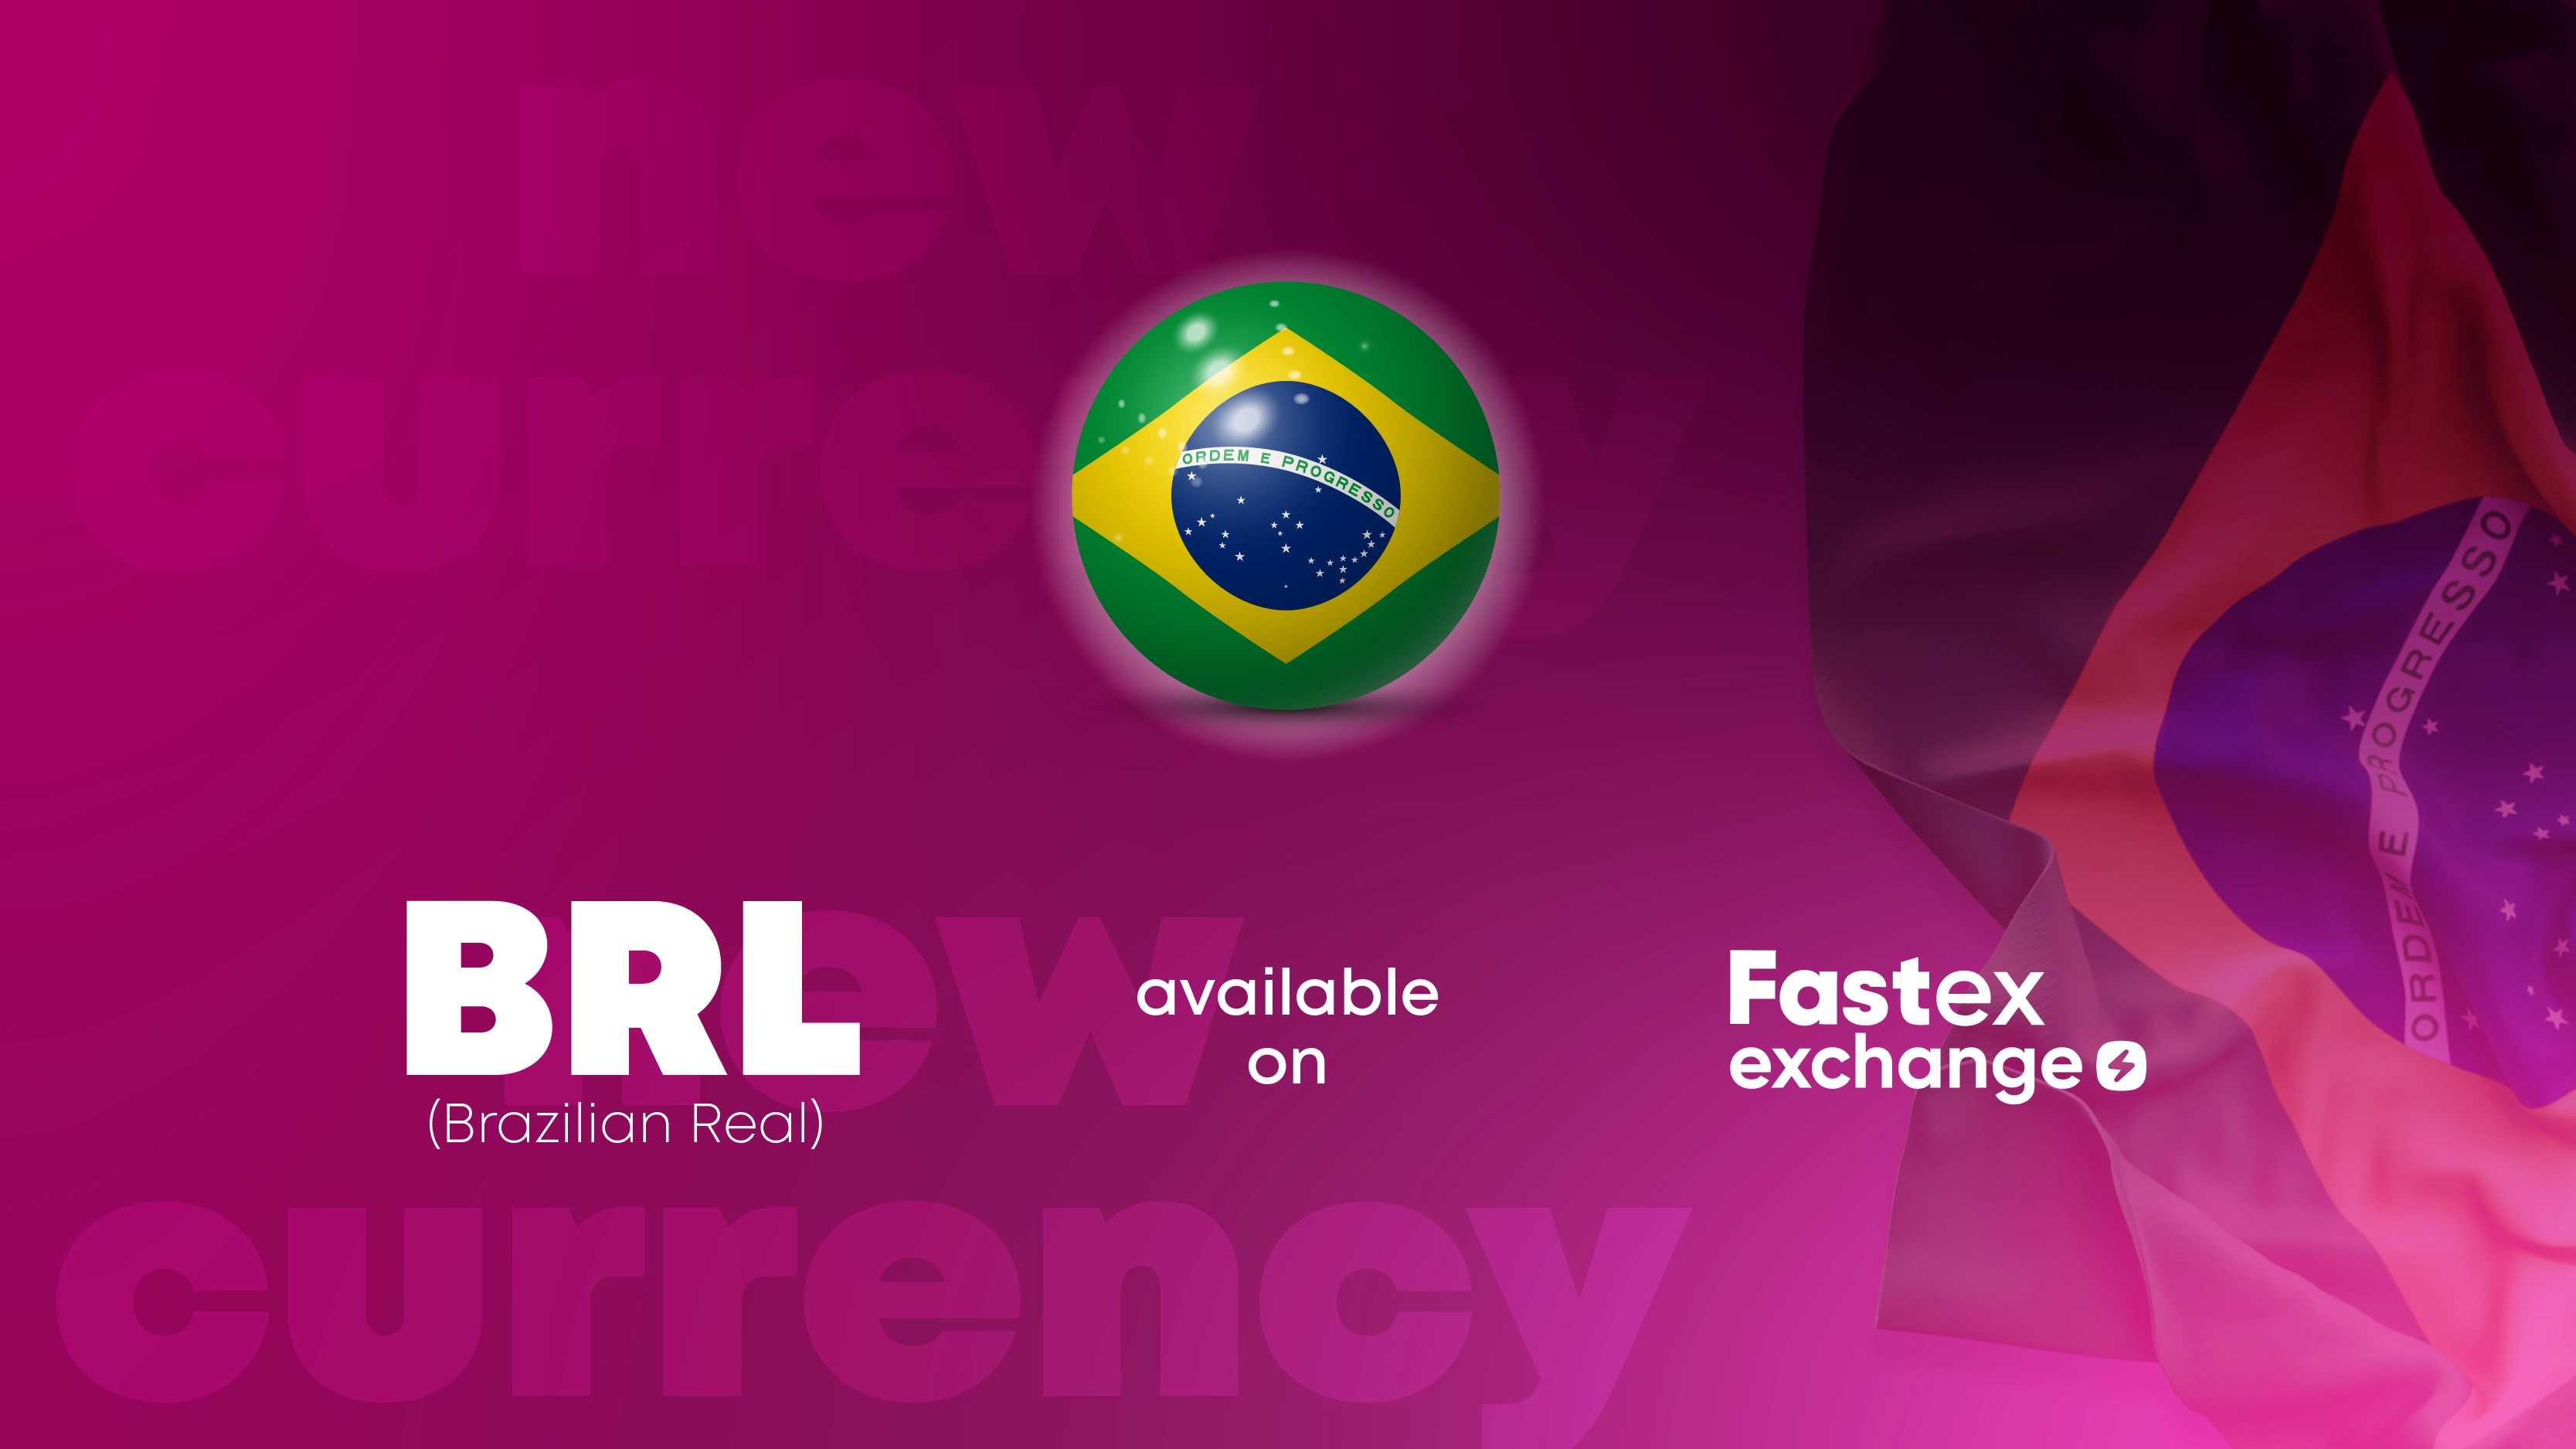 Fastex Exchange integrated the national currency of Brazil